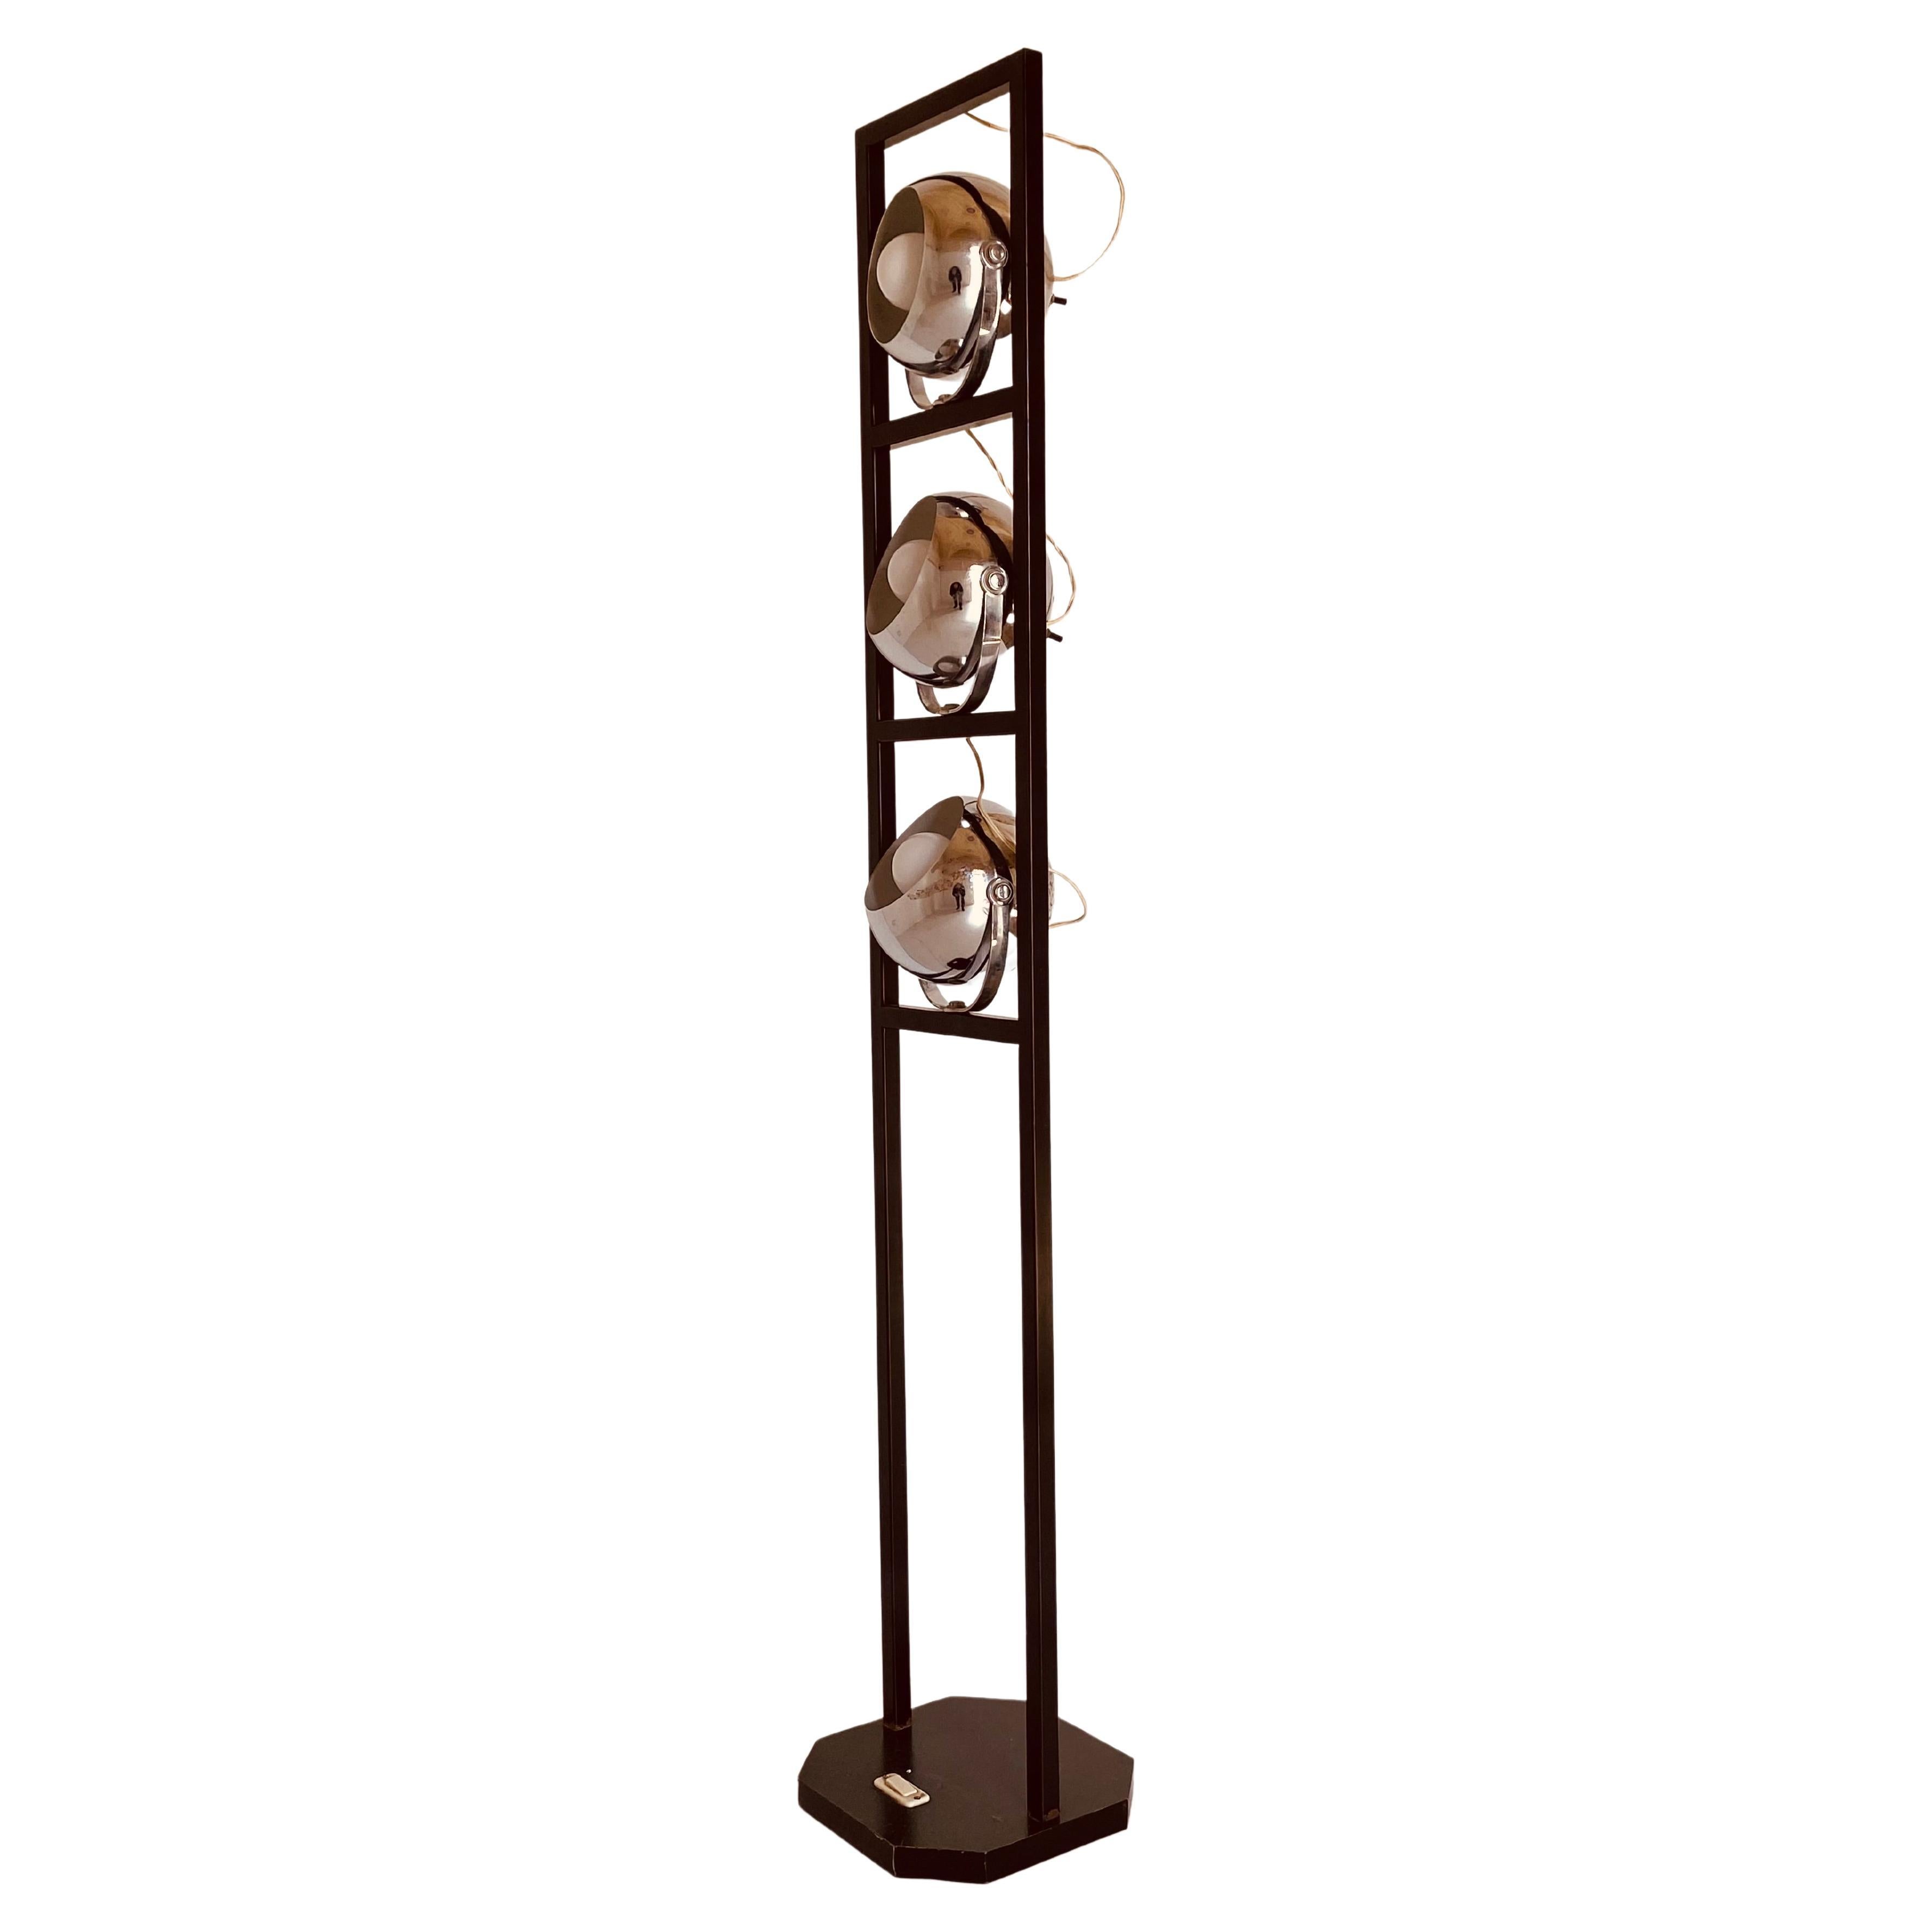 A 1960s vintage floor lamp manufactured in Italy in the 1960's.
Iron rectangular structure with three lights adjustable chromed spots. Each light spot can be switched on individually thanks to a switch on the back of the globe. The lamp has been